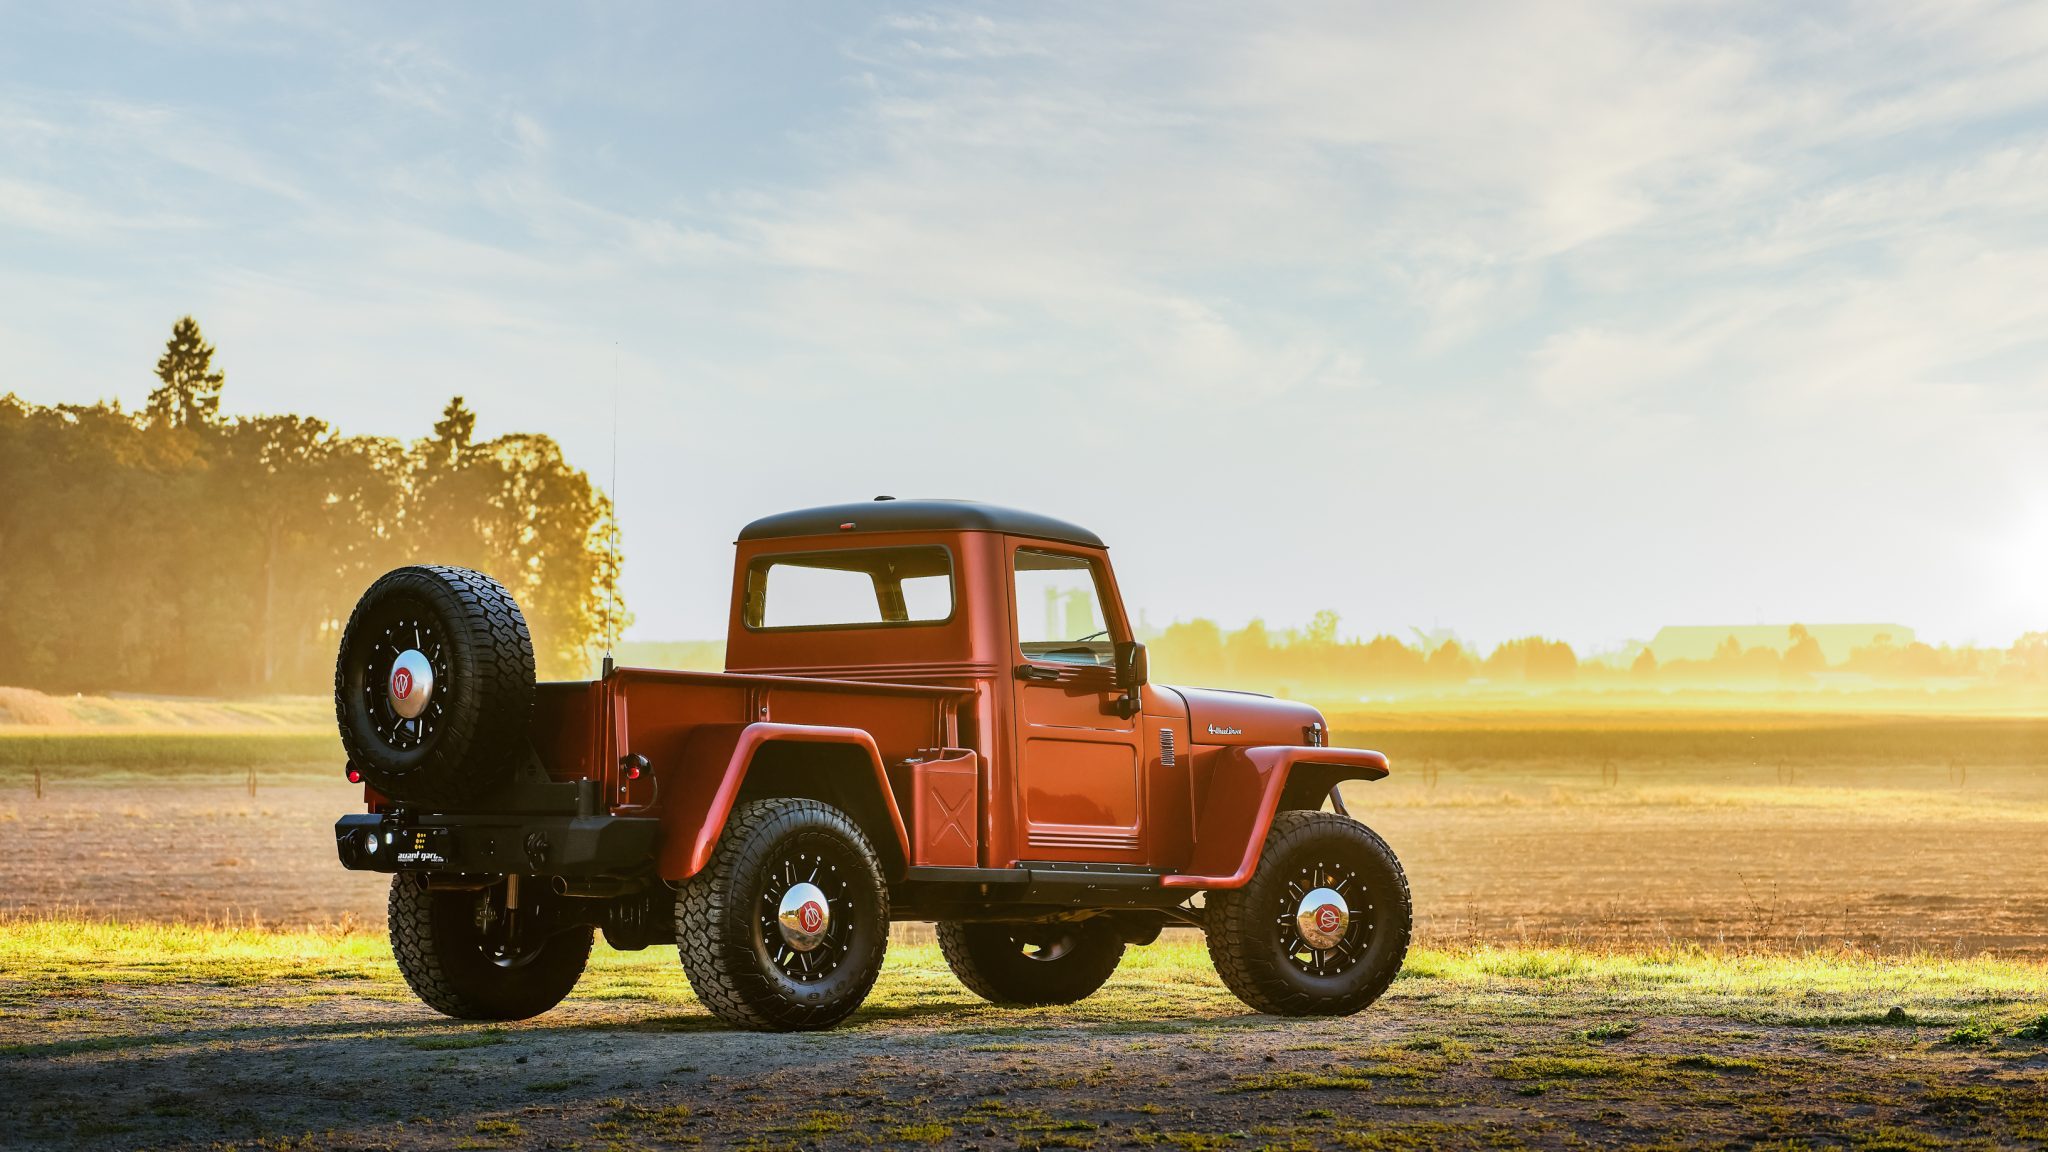 1955 Willys Jeep Pickup With JK Wrangler Chassis Rocks Supercharged V6  Engine - autoevolution